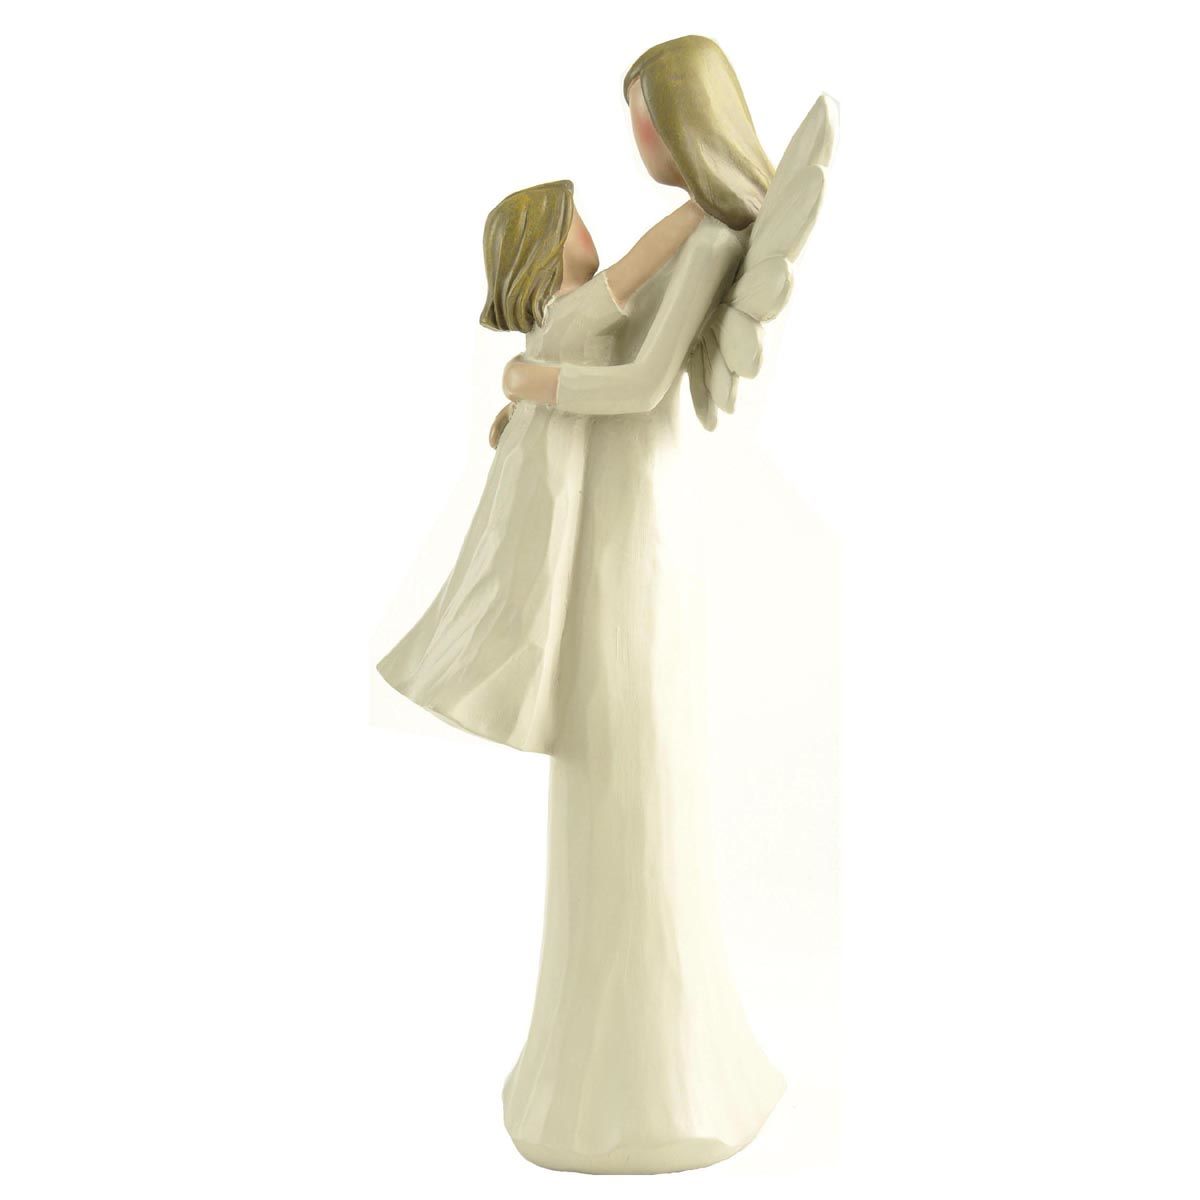 2020 Amazon Hot Sales Mother & Daughter Happy Family Angel Figurine Statues